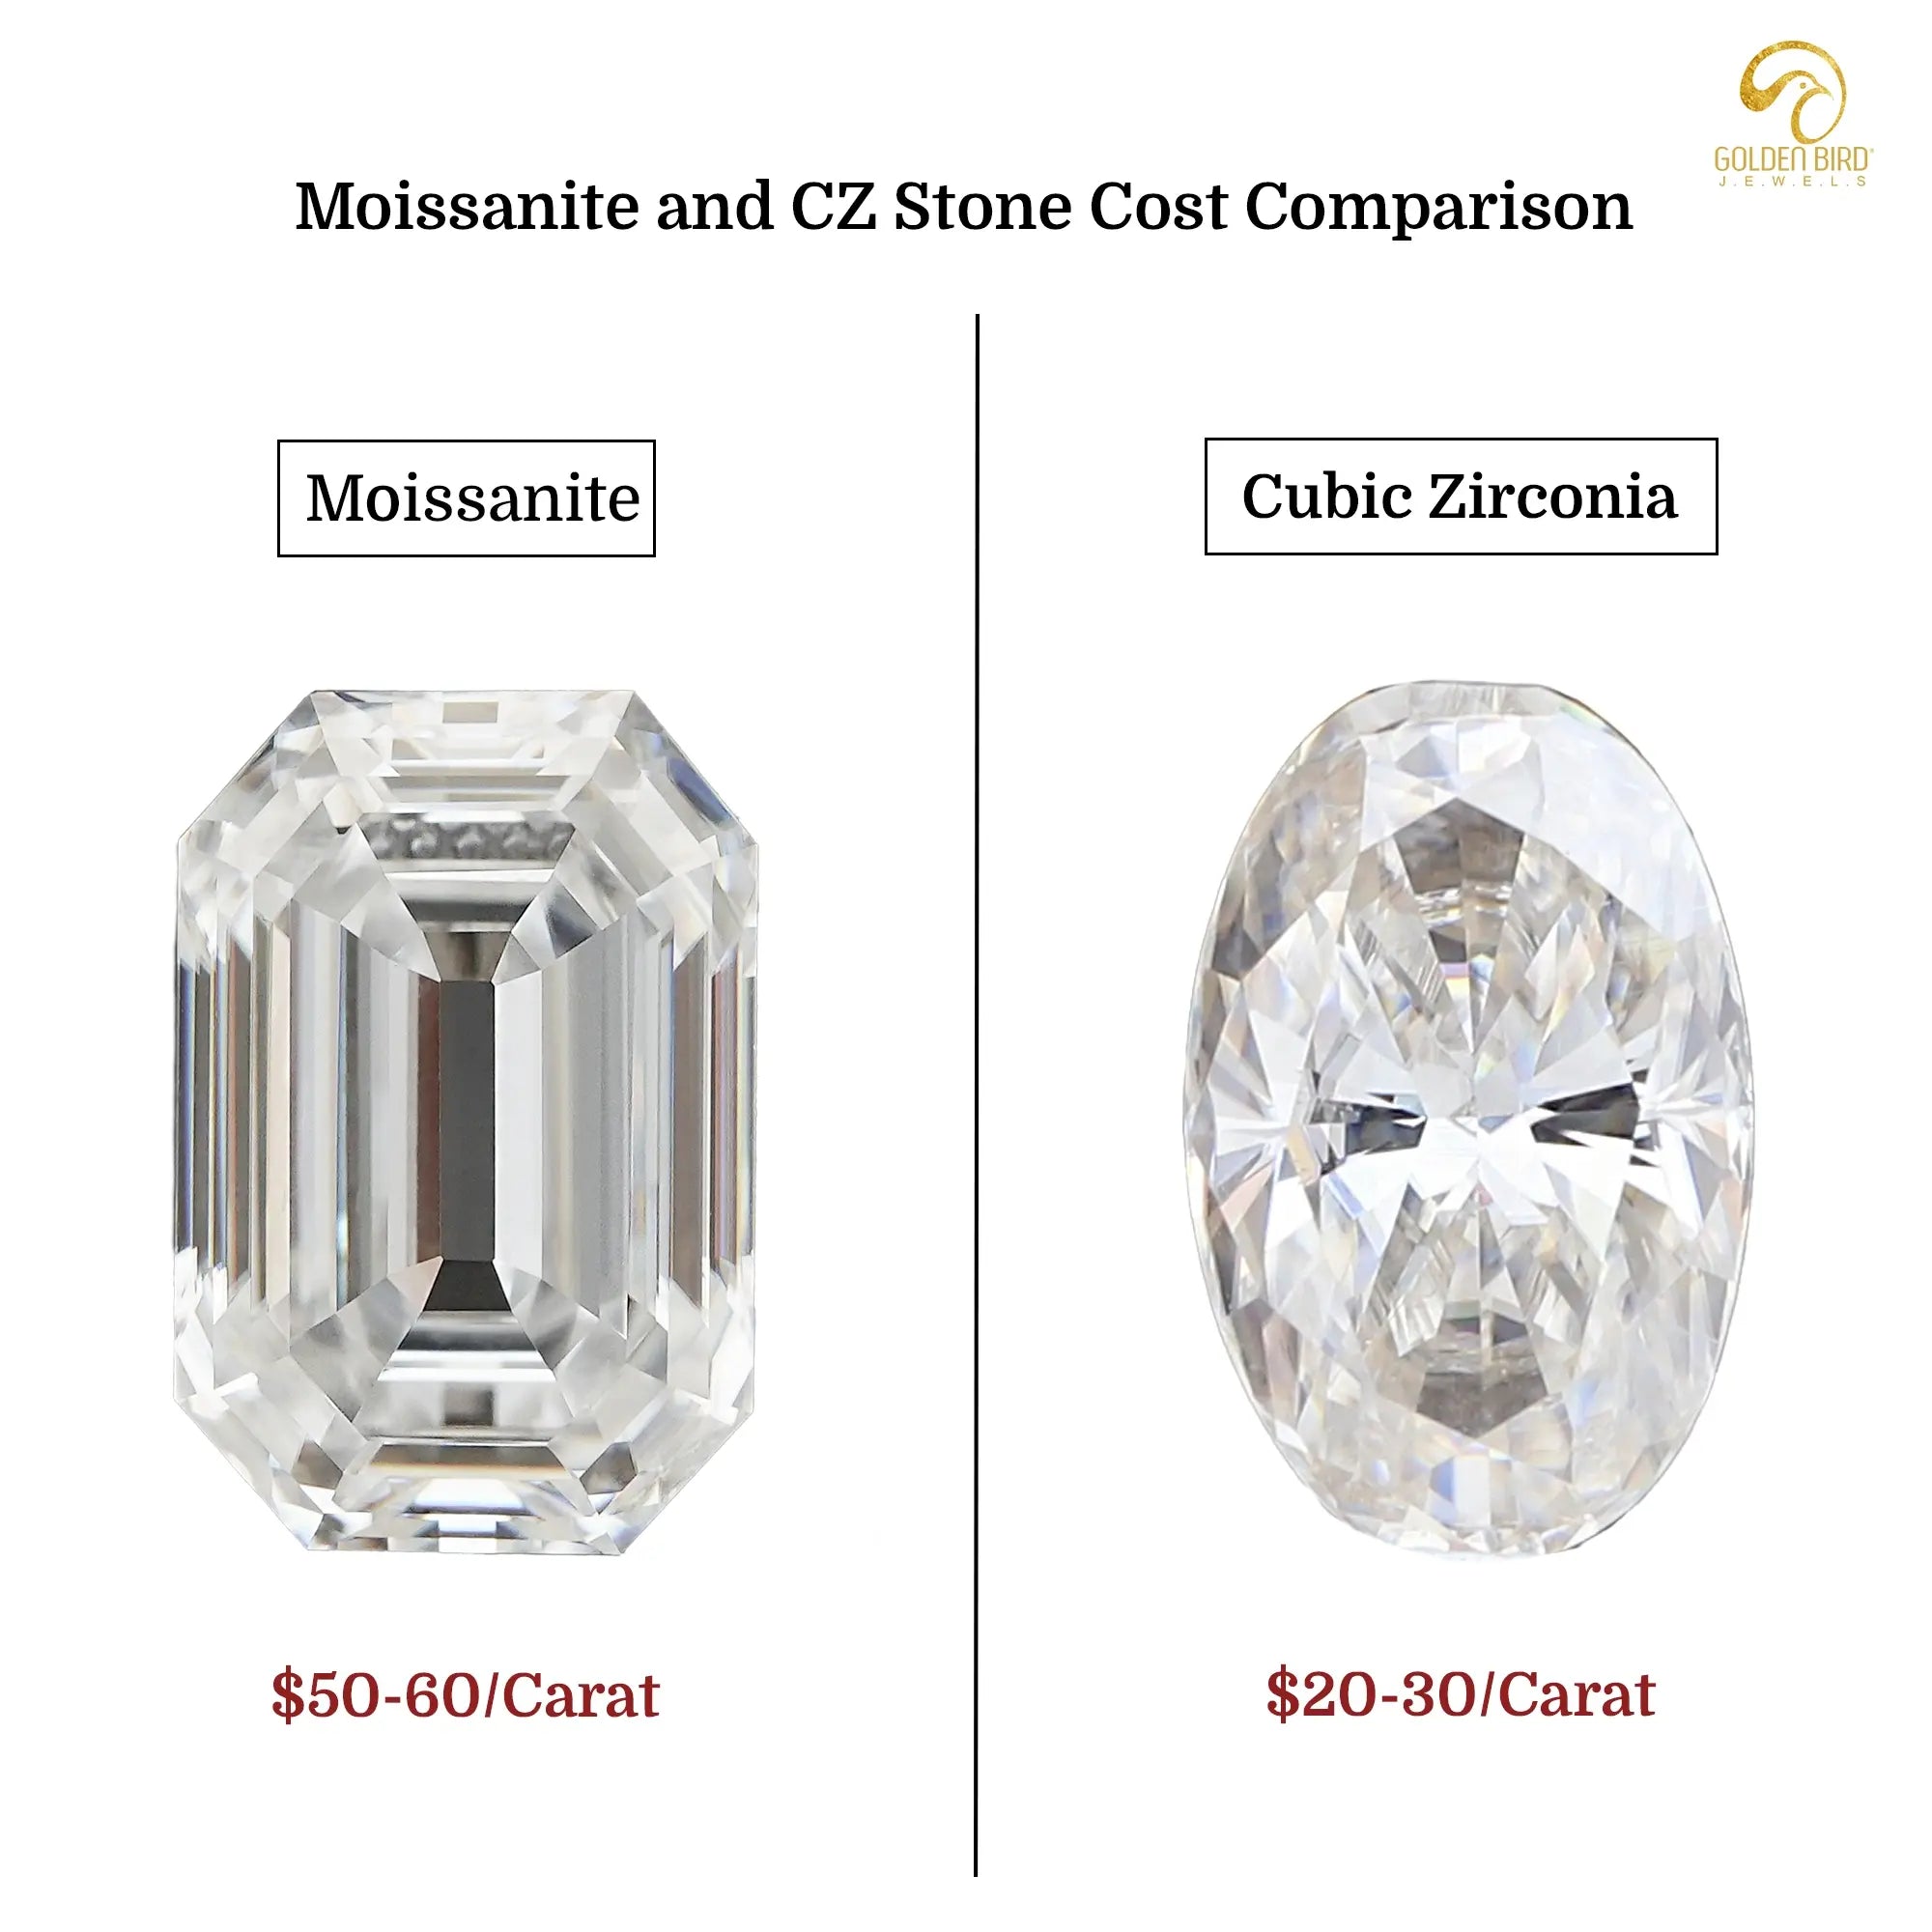 Cost and value comparison between moissanite and cubic zirconia stones